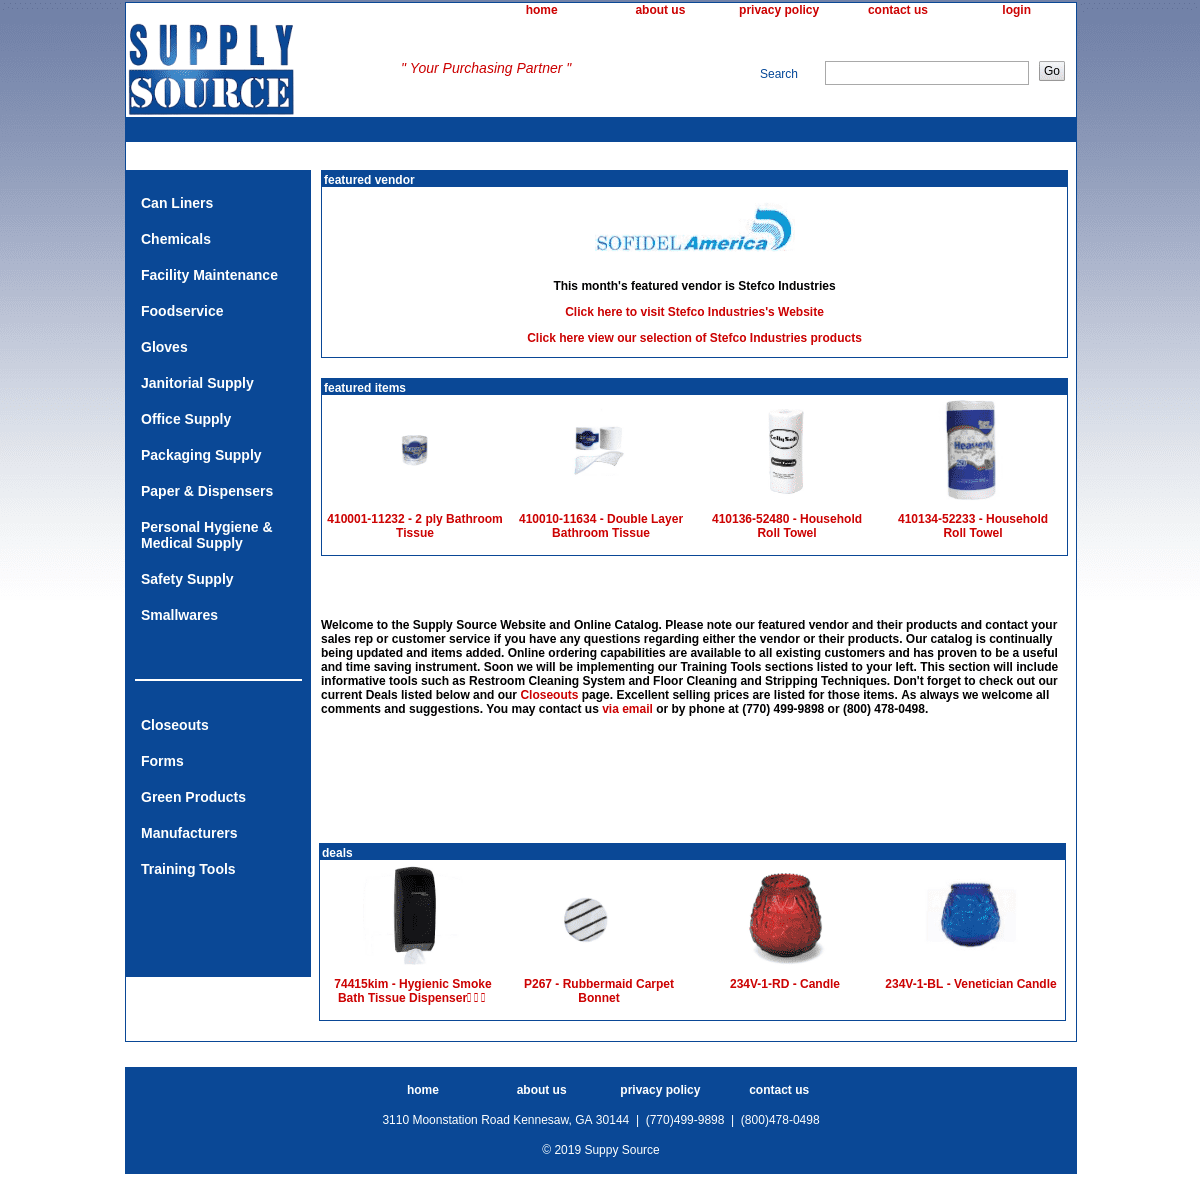 Supply Source - Your Purchasing Partner